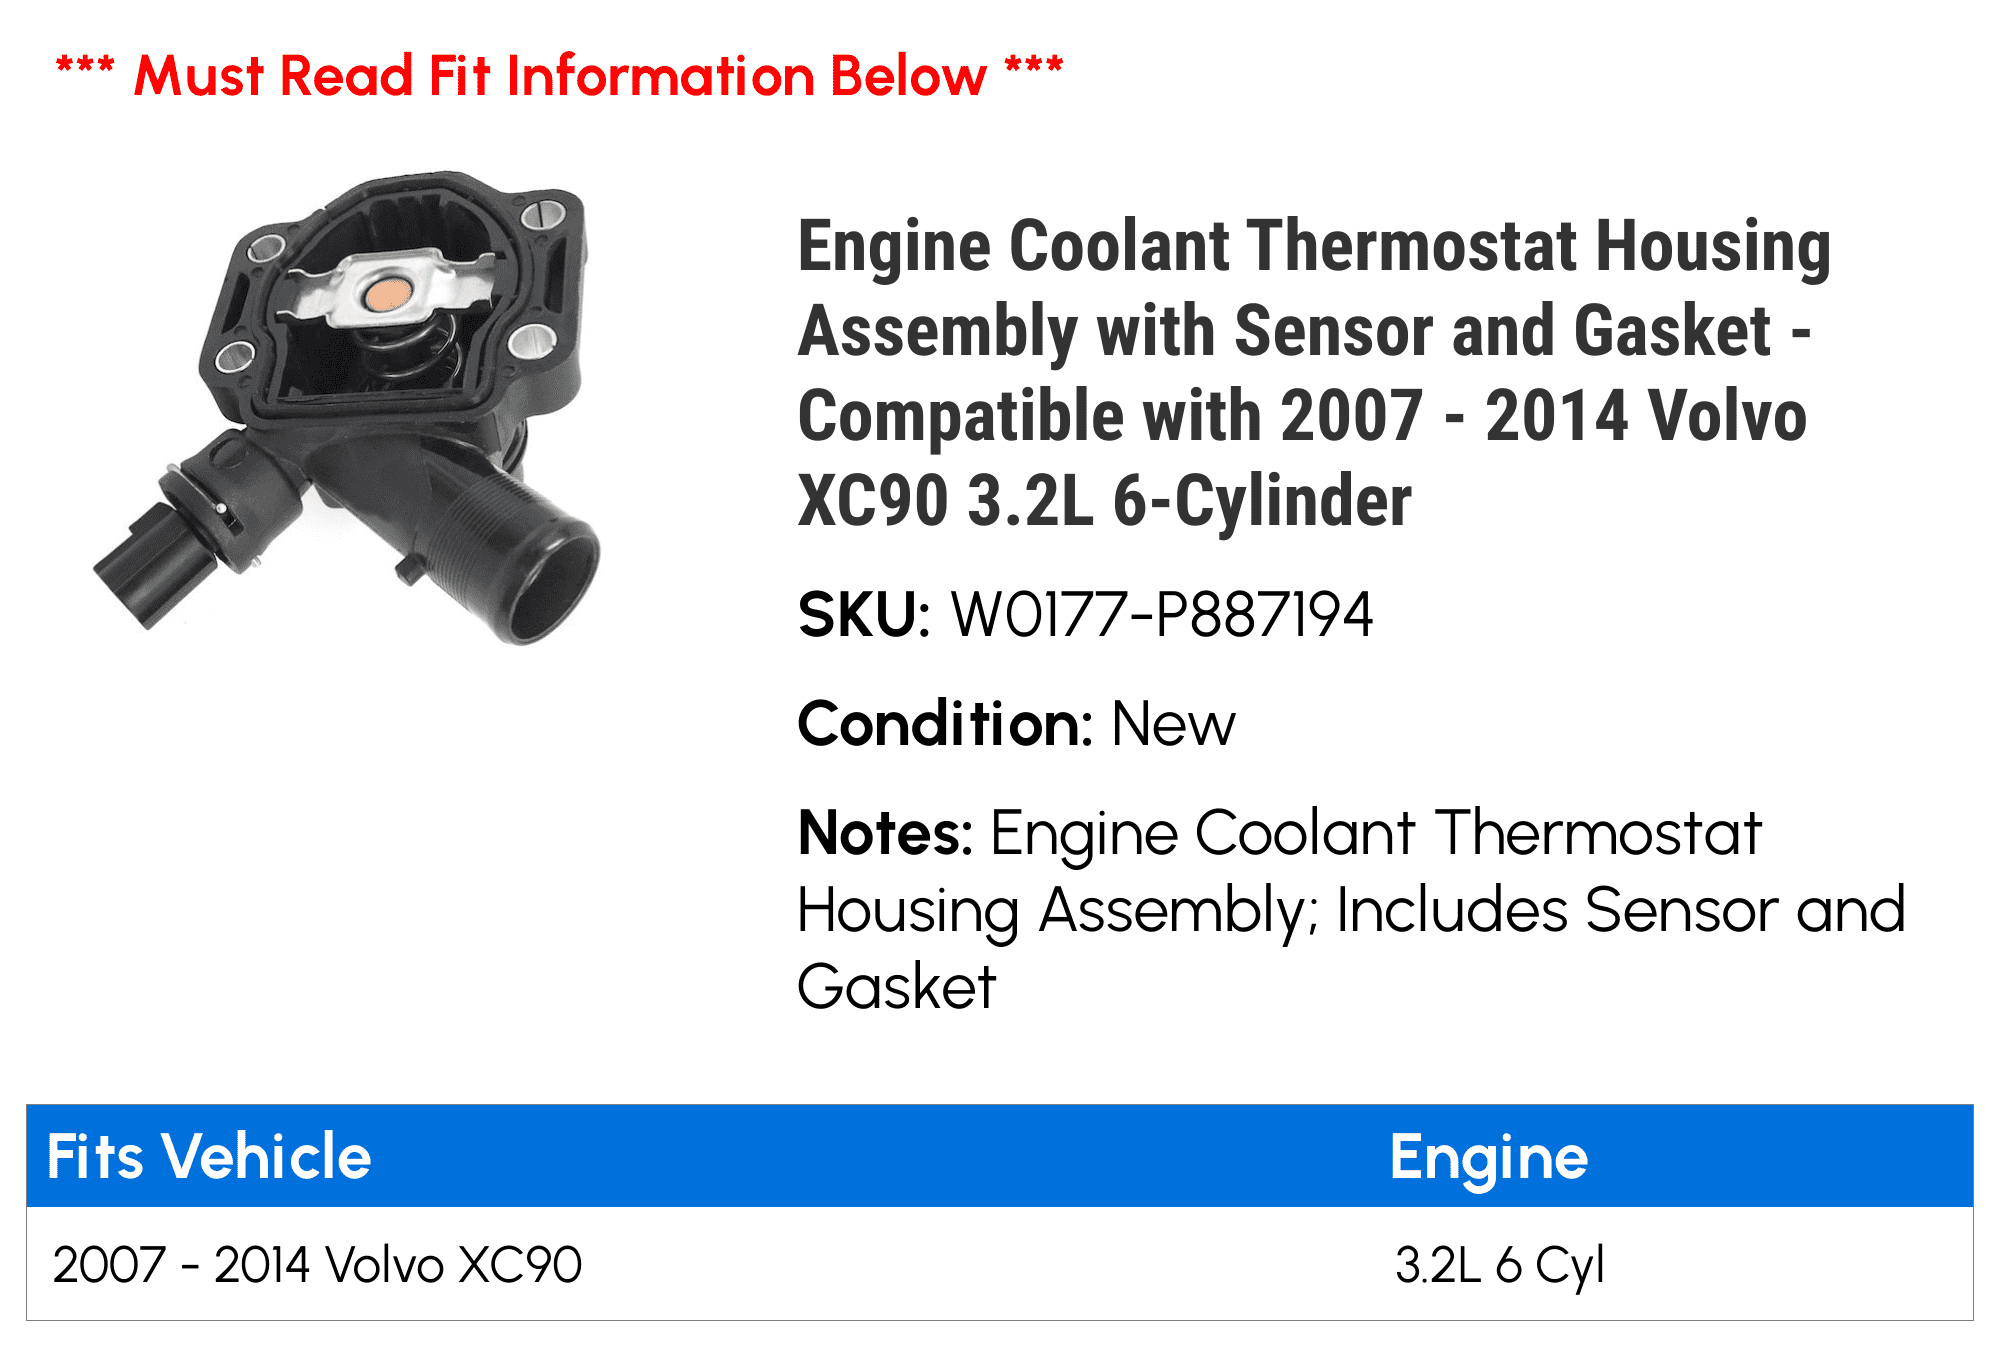 Engine Coolant Thermostat Housing Compatible with Volvo